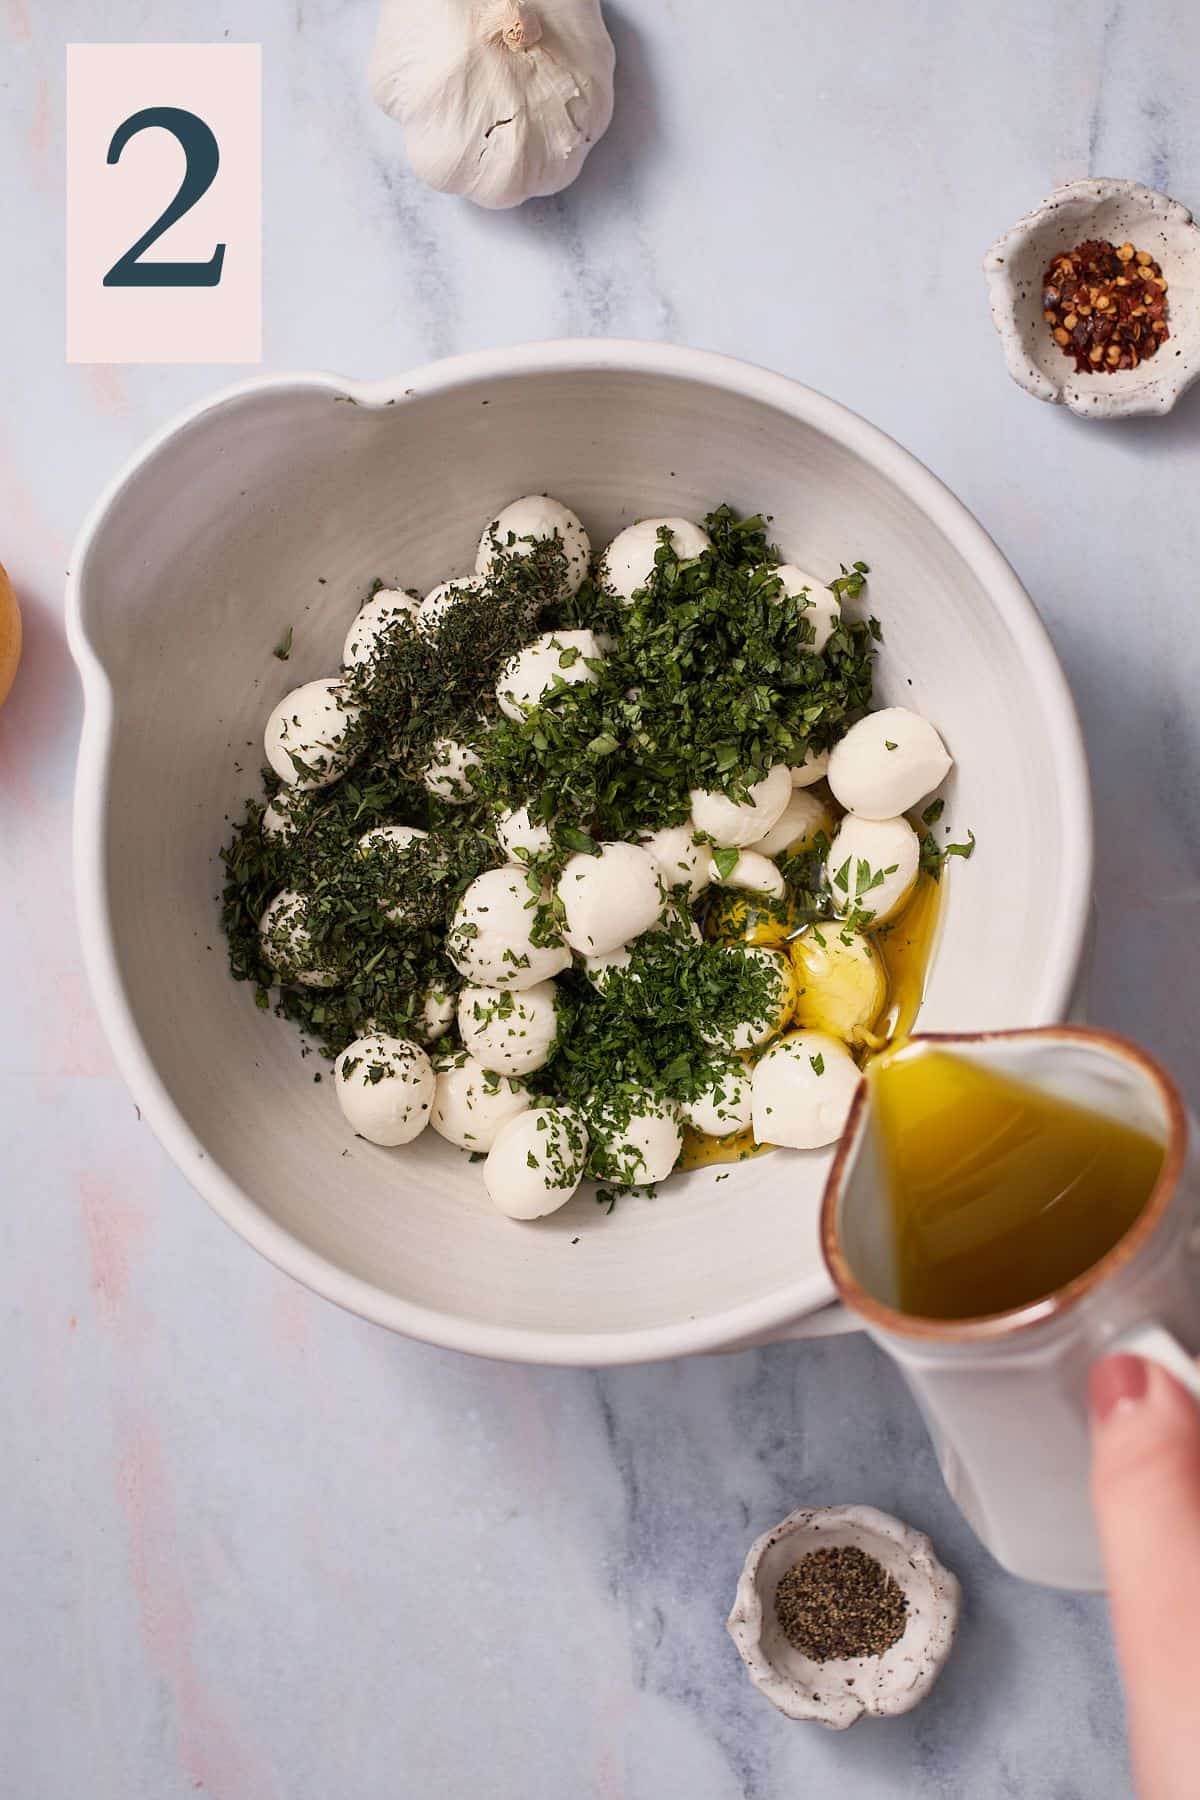 hand pouring olive oil into a bowl with mozzarella and herbs.